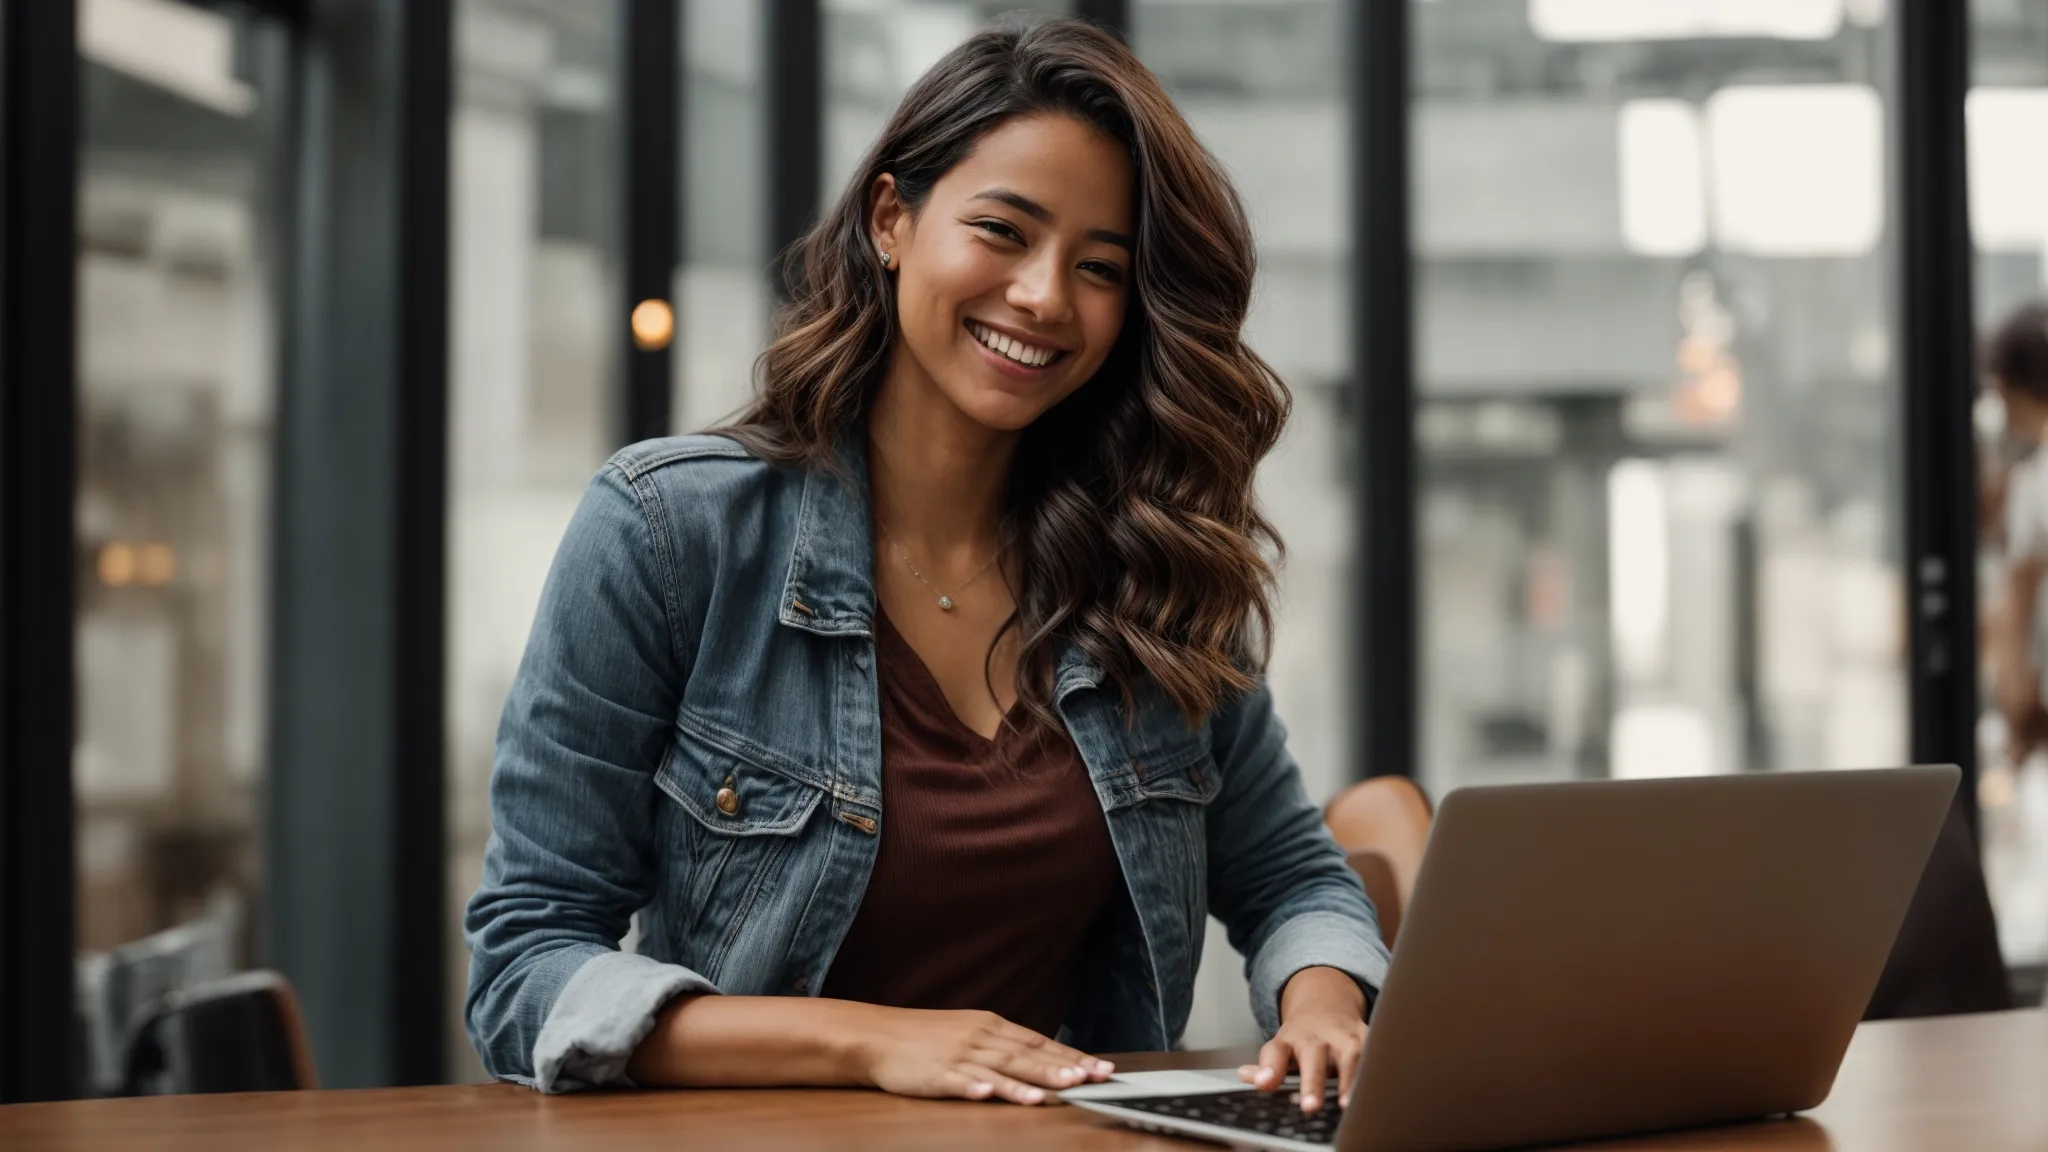 a marketer smiles with satisfaction as she observes a significant uptick in visitor engagement on her laptop's analytics dashboard after using landing page monkey.